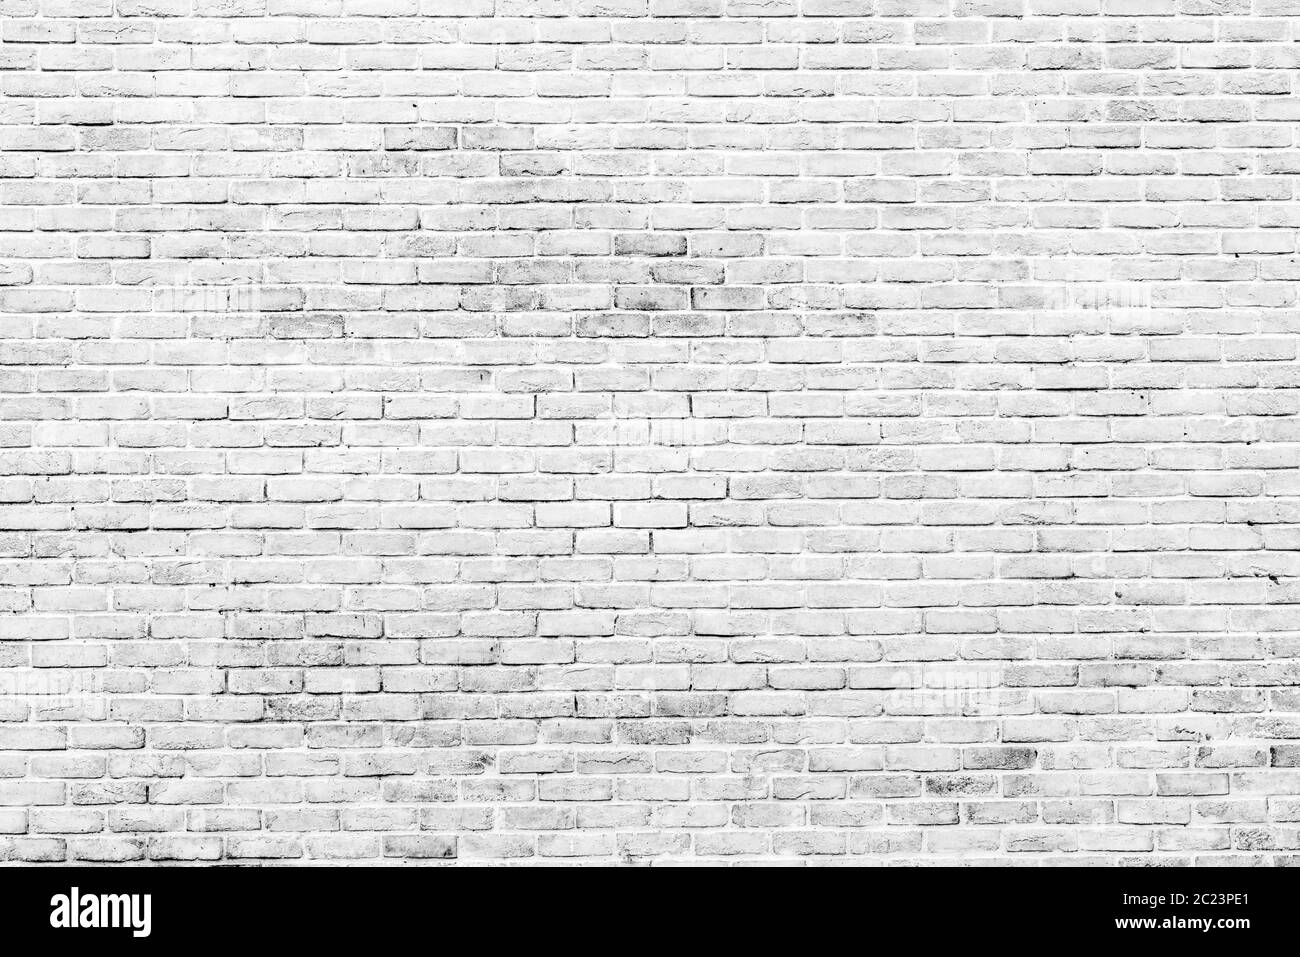 White And Grey Brick Wall Texture Background With Space For Text White Bricks Wallpaper Home Interior Decoration Architecture Concept Background F Stock Photo Alamy